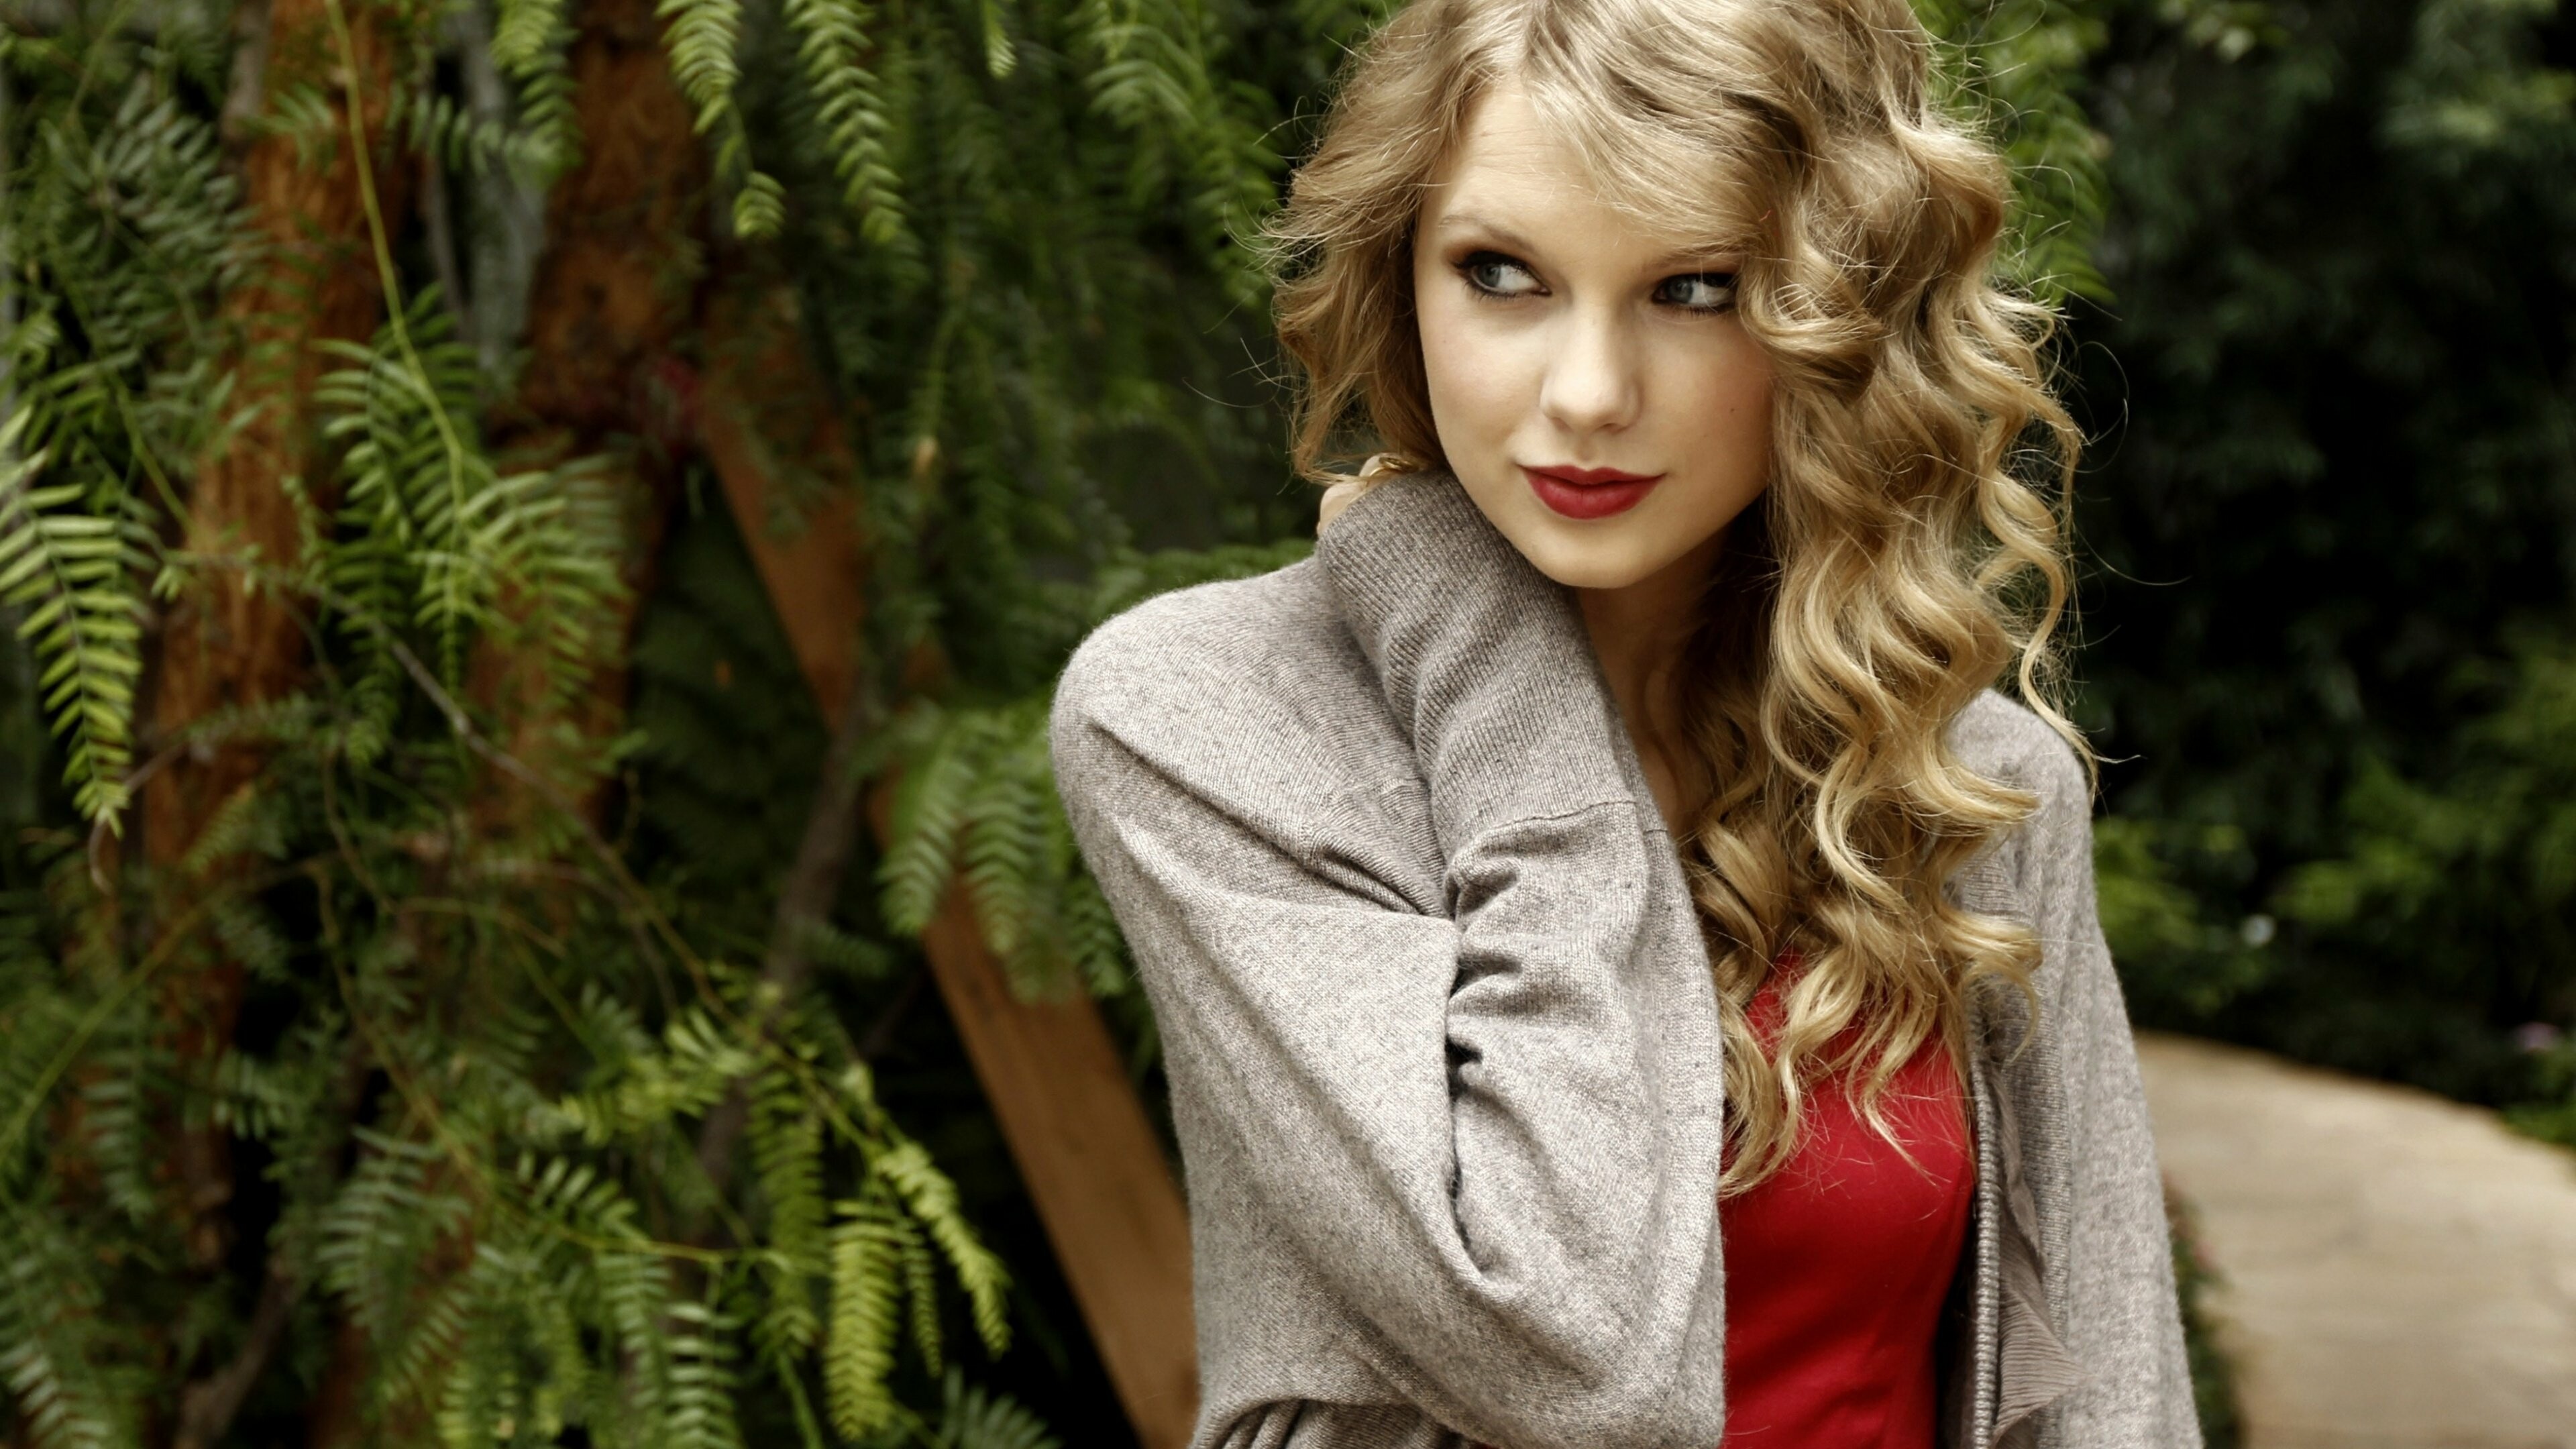 Taylor Swift: "Should've Said No" was released to US country radio on May 19, 2008. 3840x2160 4K Background.